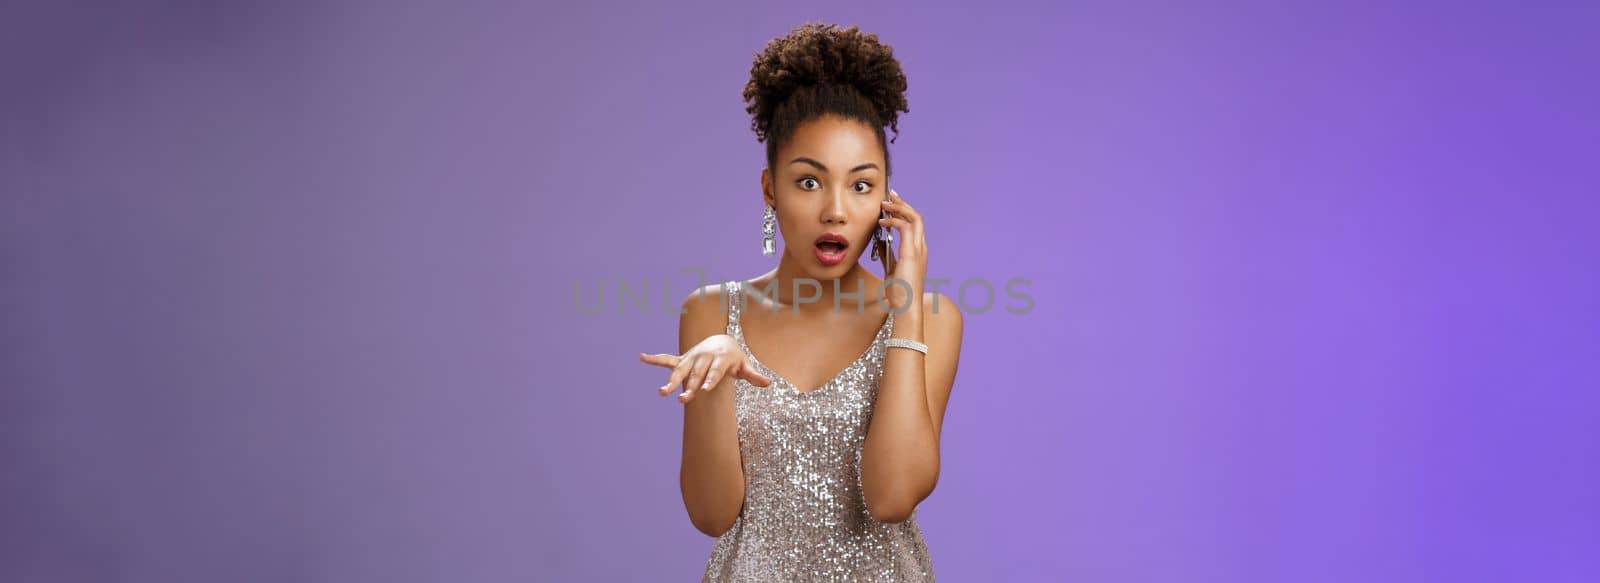 Astonished shocked african american woman gossiping talking smartphone drop jaw astonished holding phone ear raise hand dismay concerned standing speechless hear rumour, standing blue background.